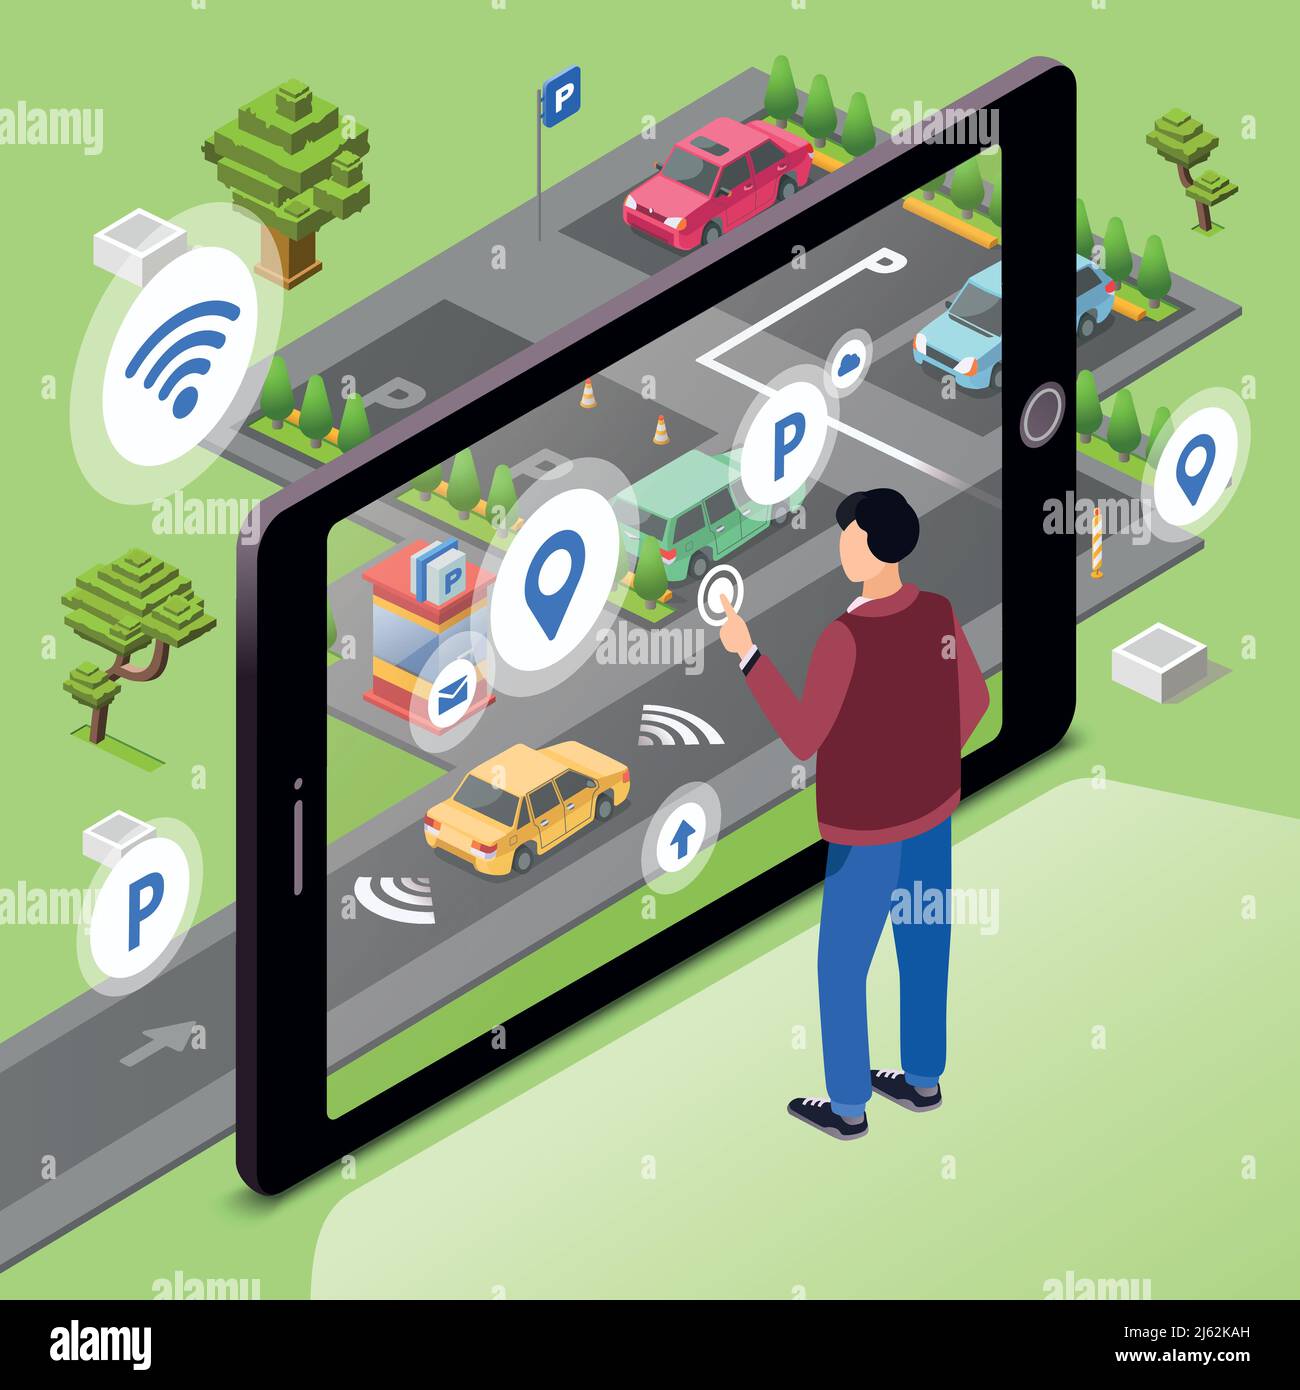 Smart parking vector illustration. Man user with smartphone touch screen control car driving to parking lot through internet connection of smart techn Stock Vector